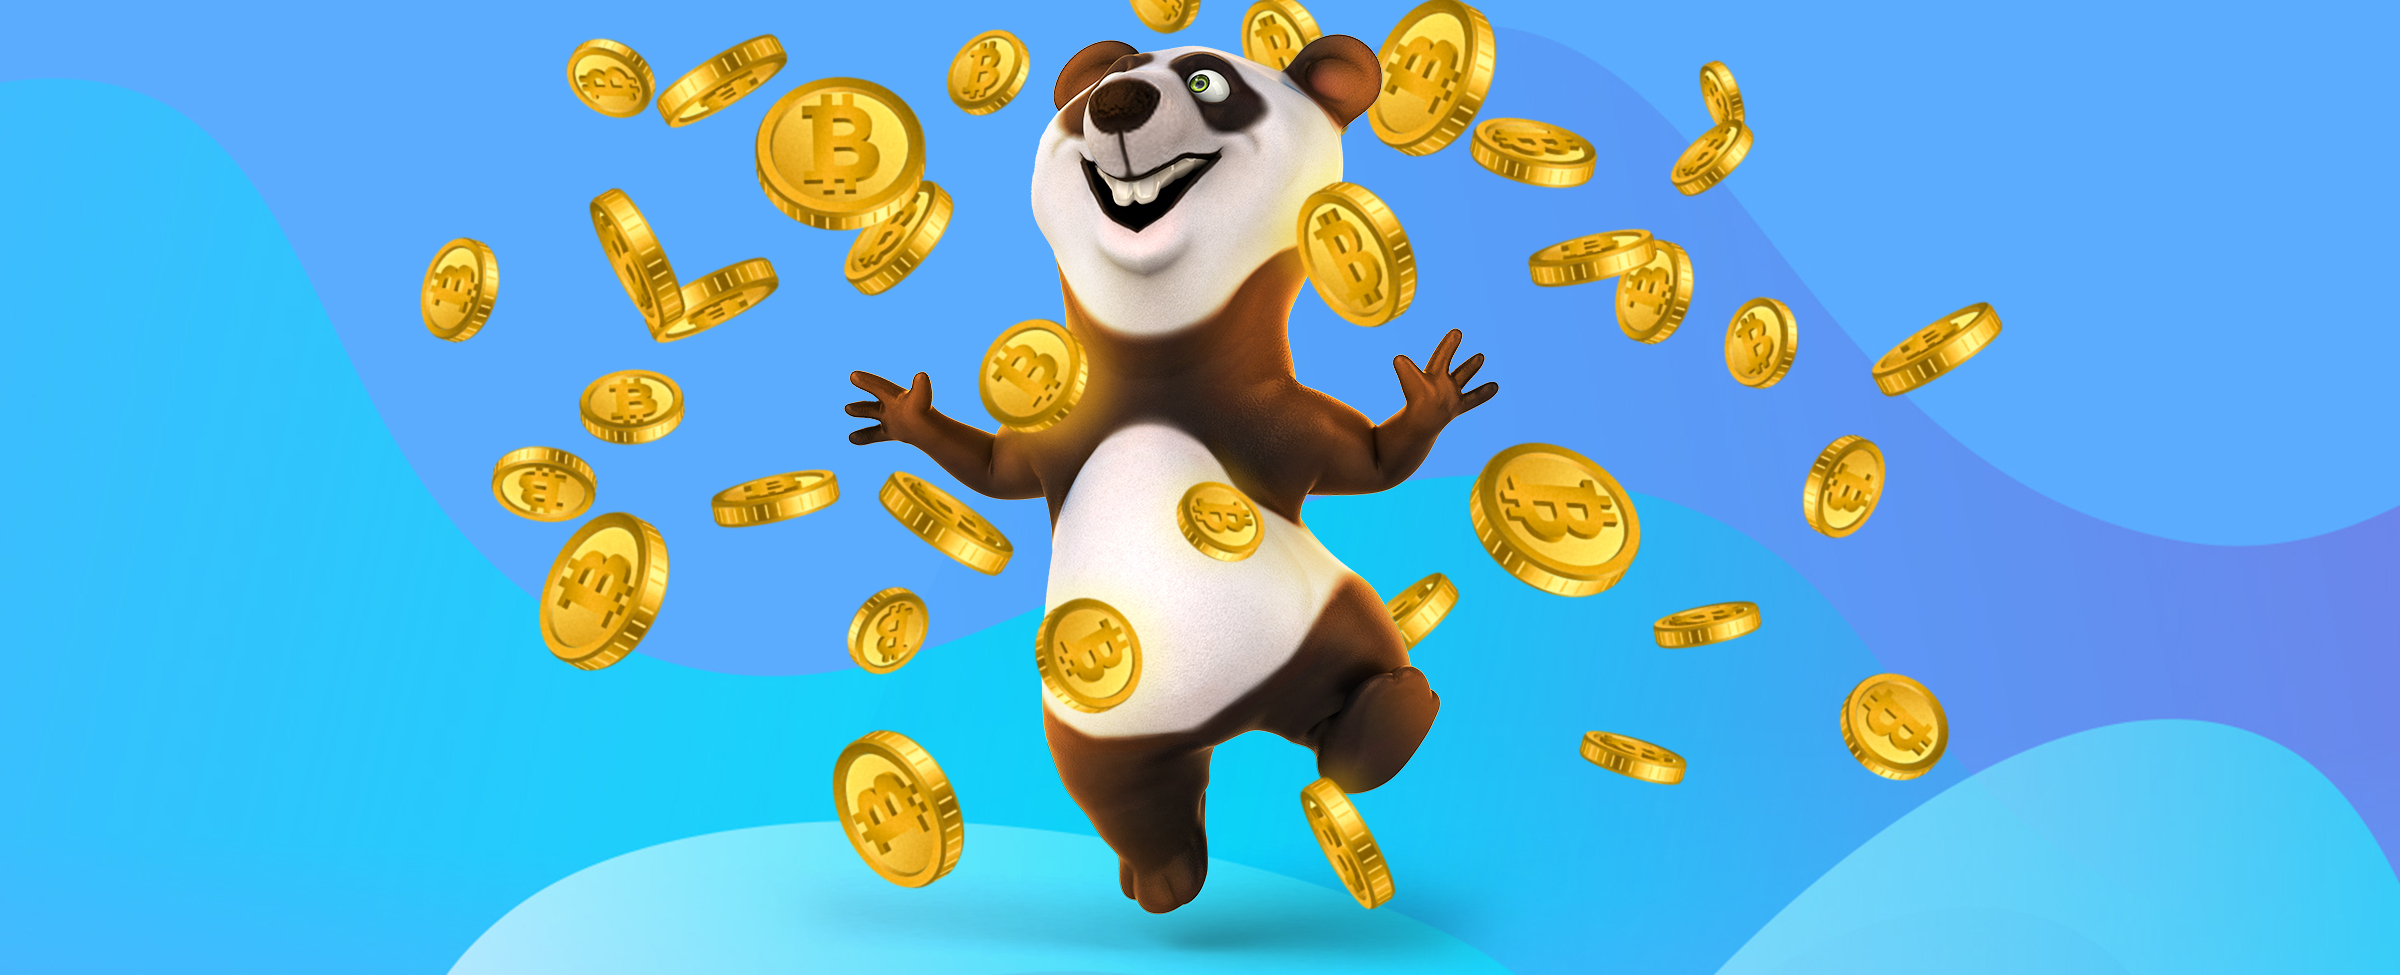 Panda cartoon character gleefully standing amongst falling bitcoins, to explain what crypto is right for you